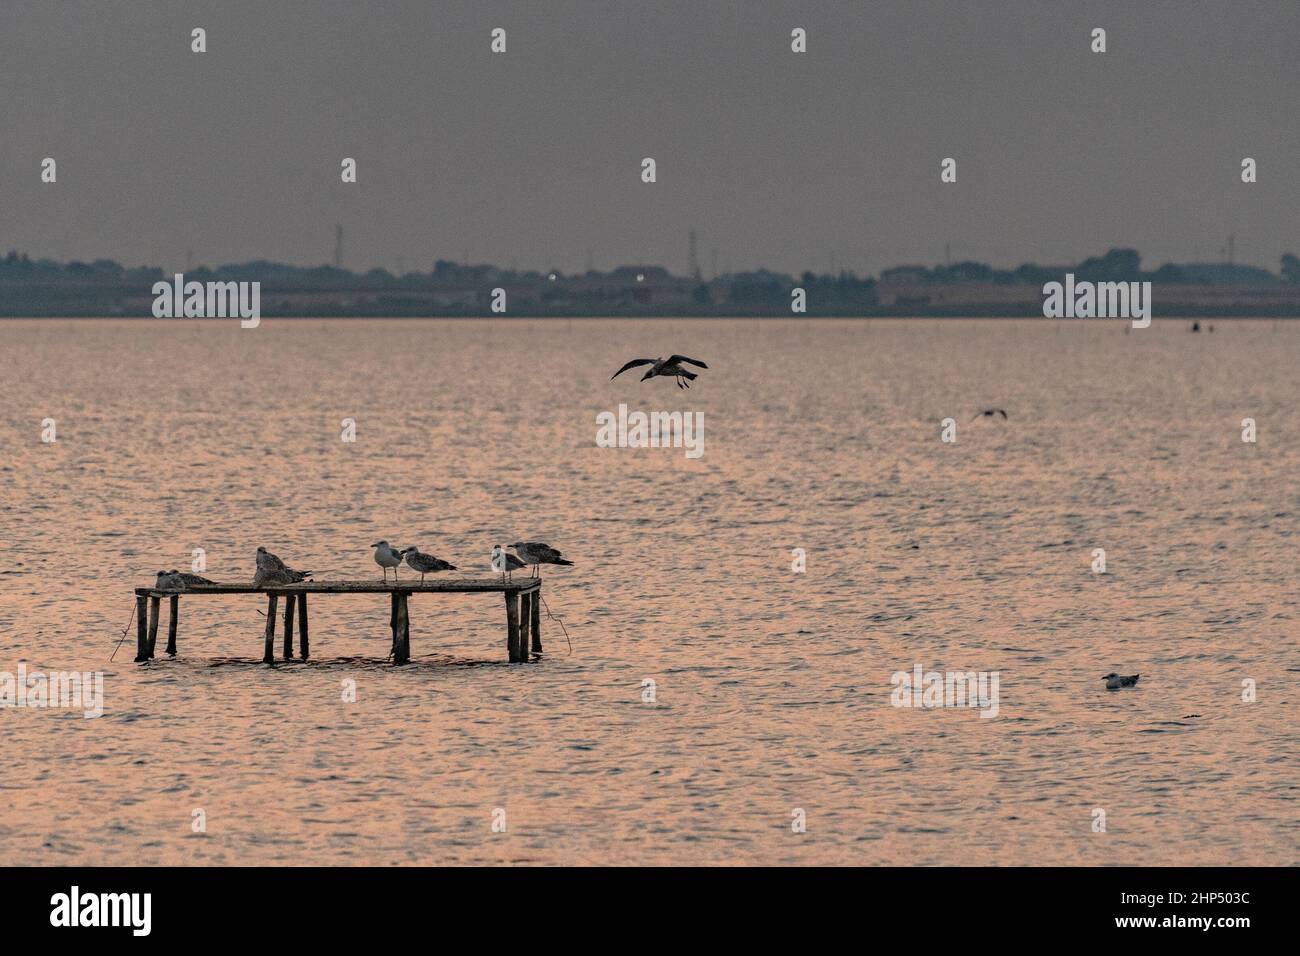 Seagulls perched on wooden structures in the middle of the lake Stock Photo